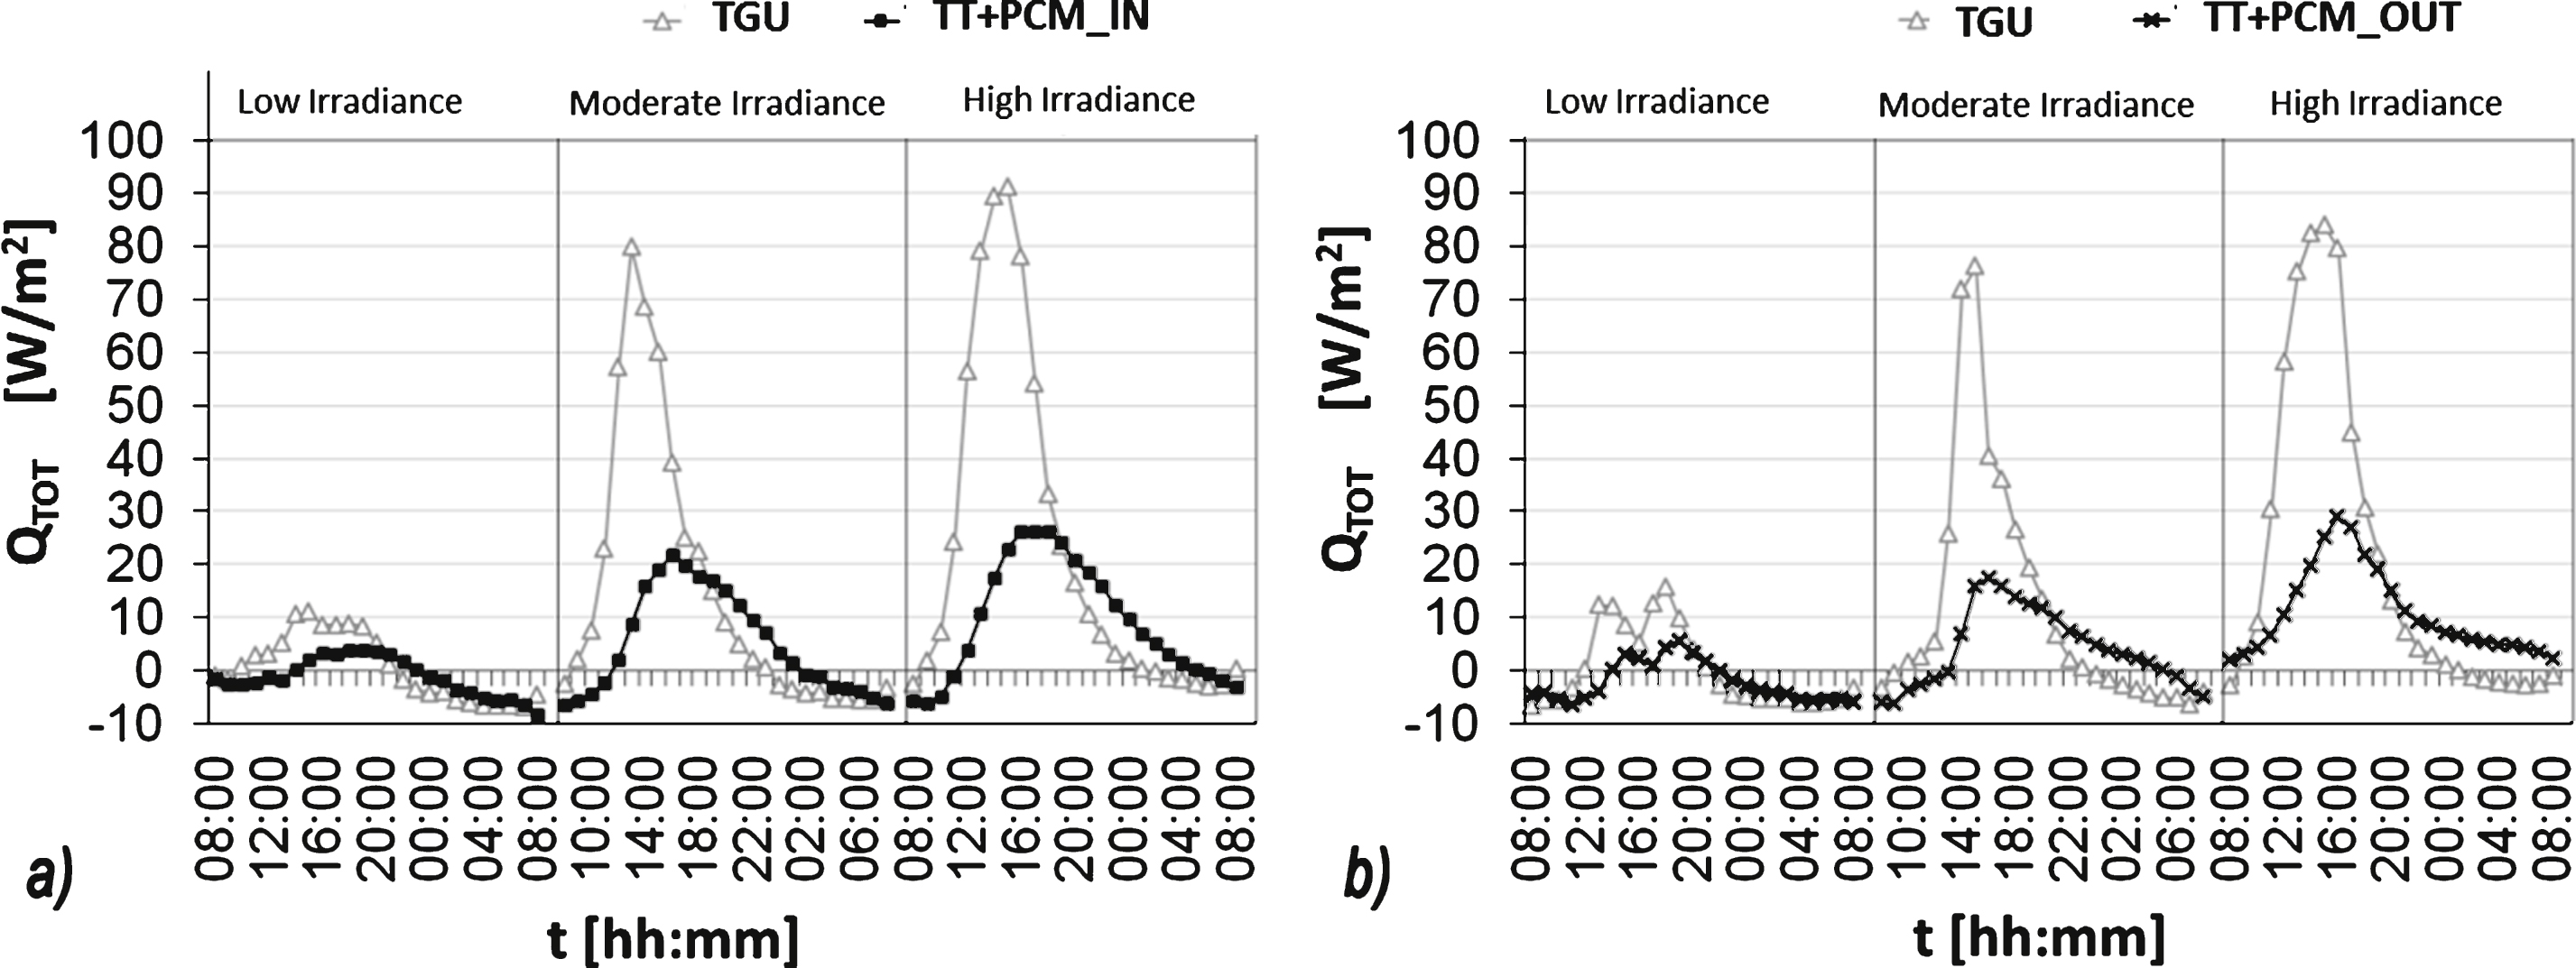 Time profiles of specific ‘surface’ heat flux – TT+PCM_IN and reference (a) and TT+PCM_OUT and reference (b).